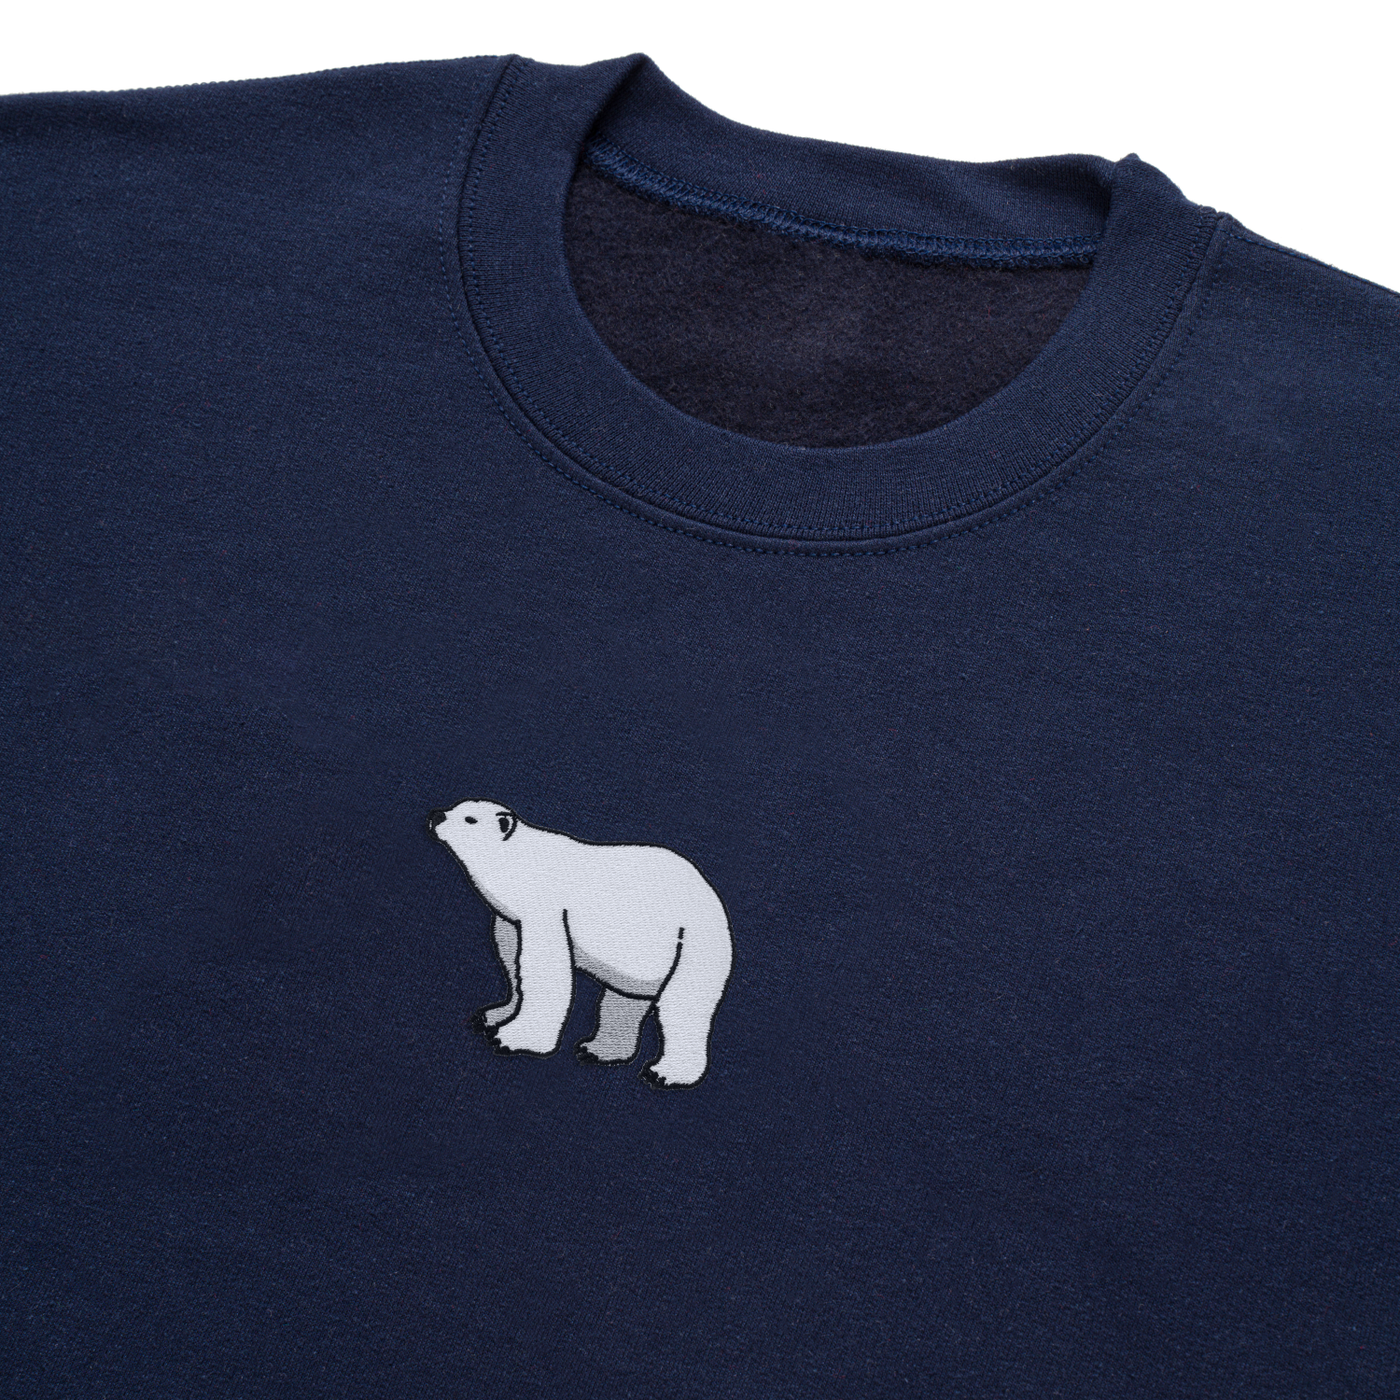 Bobby's Planet Men's Embroidered Polar Bear Sweatshirt from Arctic Polar Animals Collection in Navy Color#color_navy